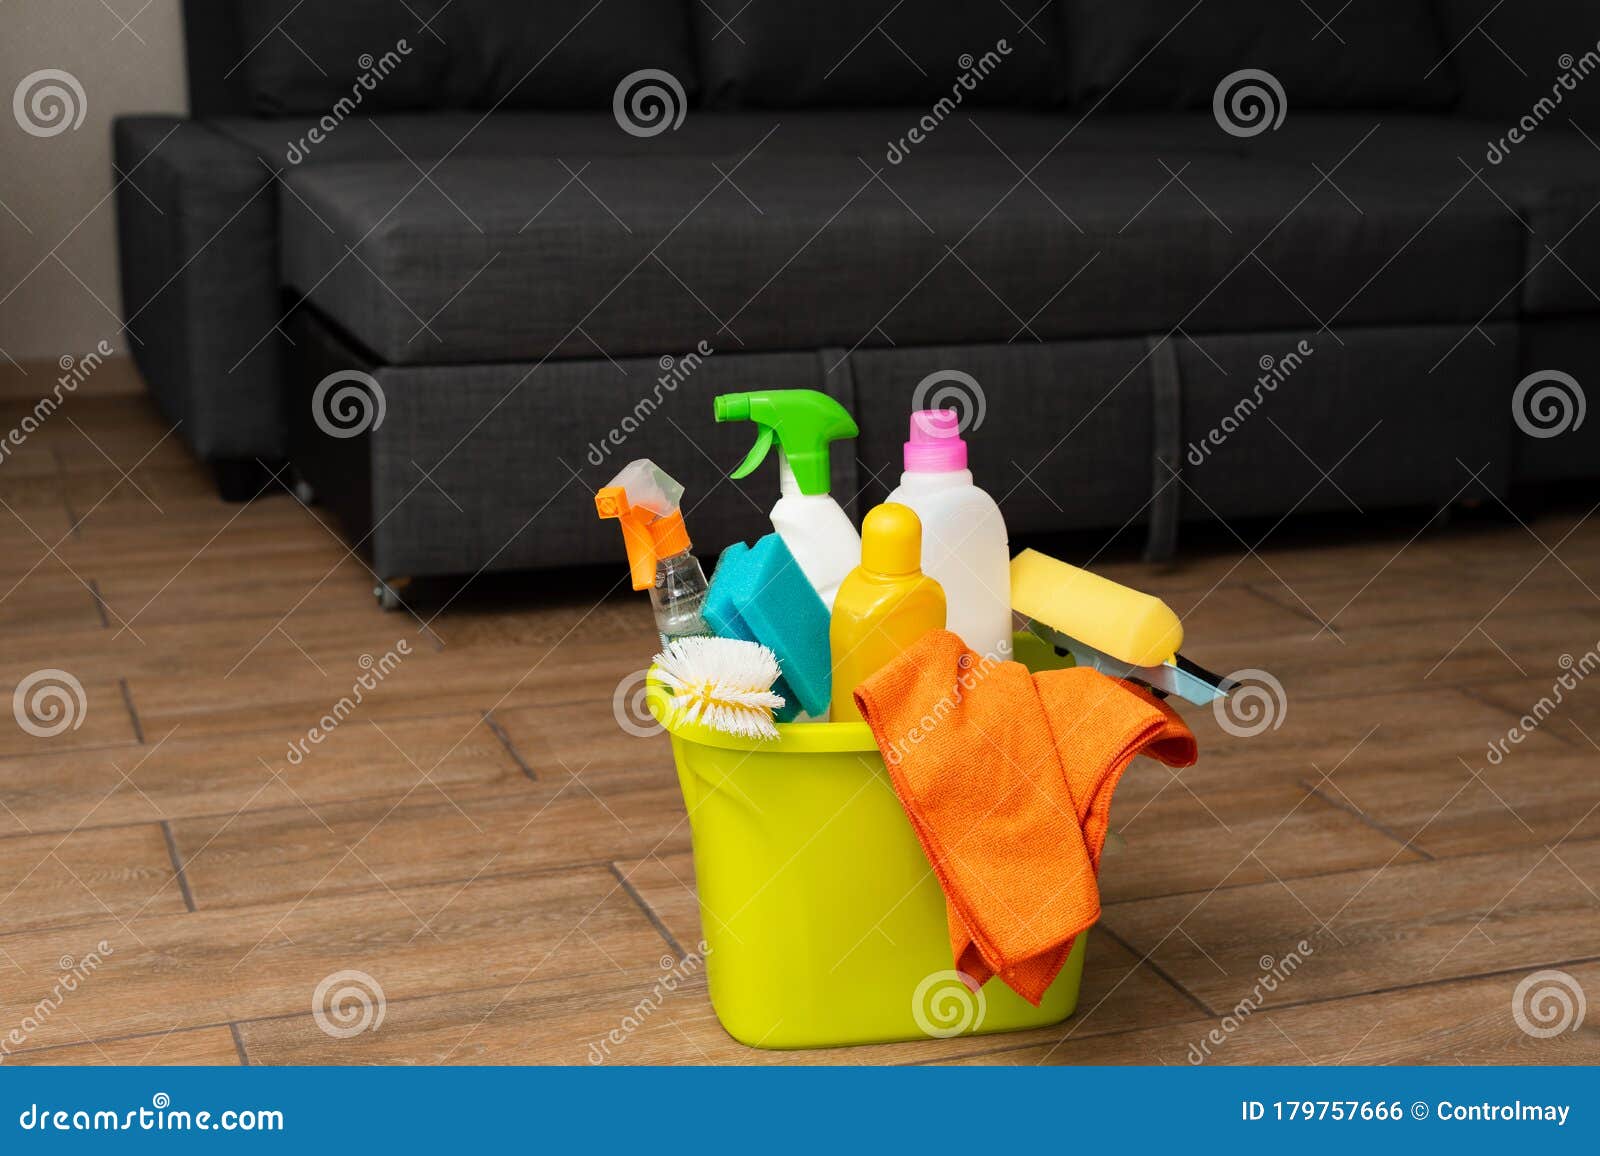 a yellow bucket with detergent in on the floor. the cleaning supplies are in bucket